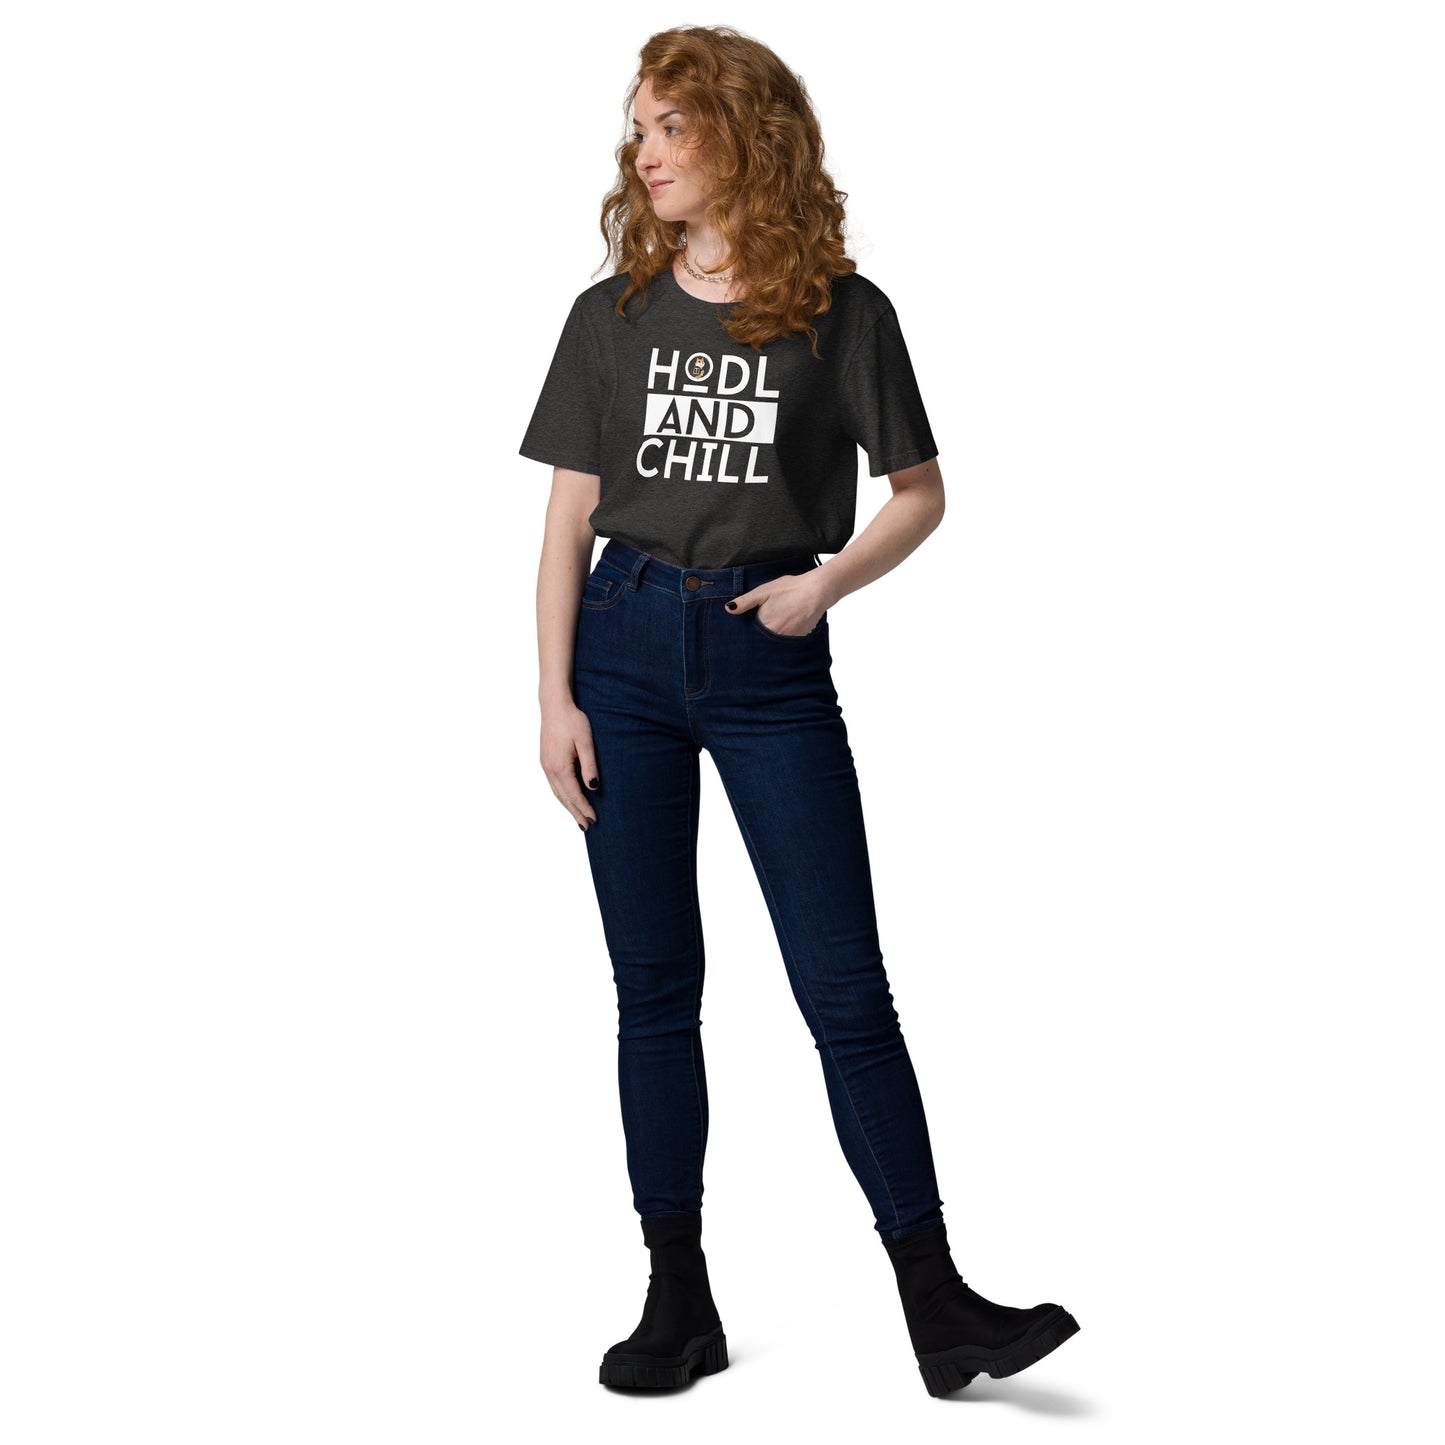 Son Of Doge 'Hodl And Chill' Women's organic cotton t-shirt